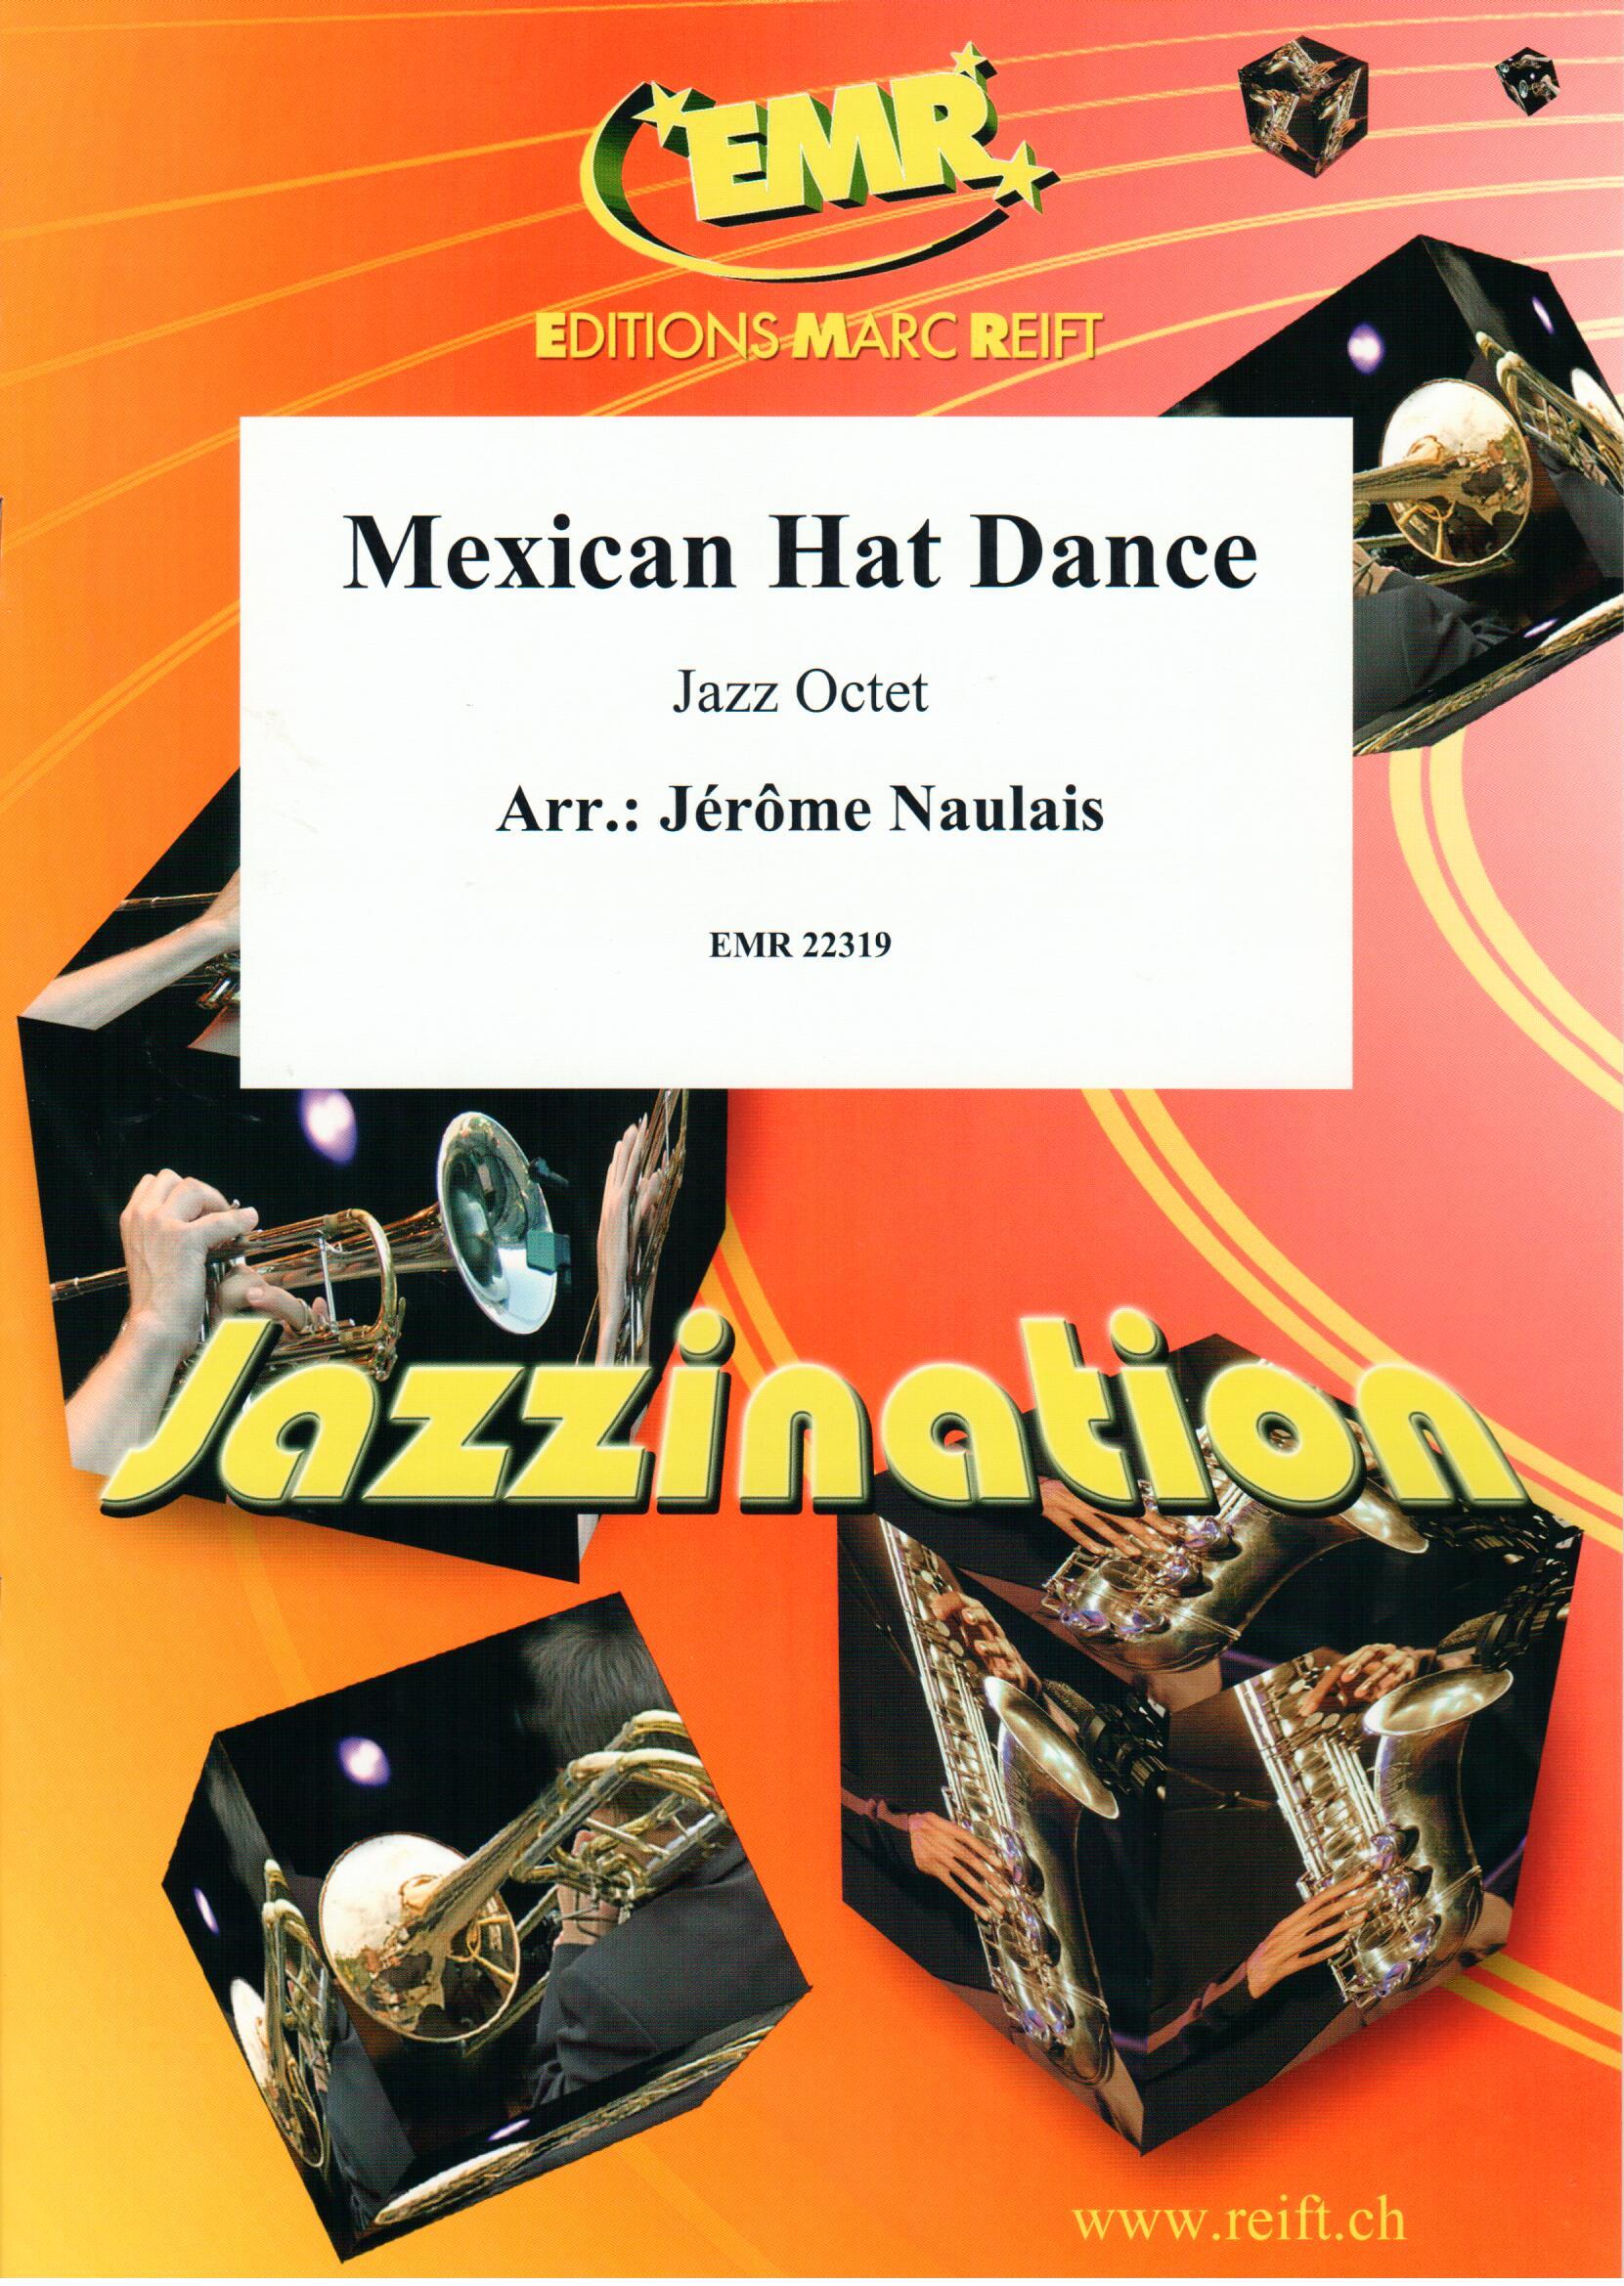 MEXICAN HAT DANCE